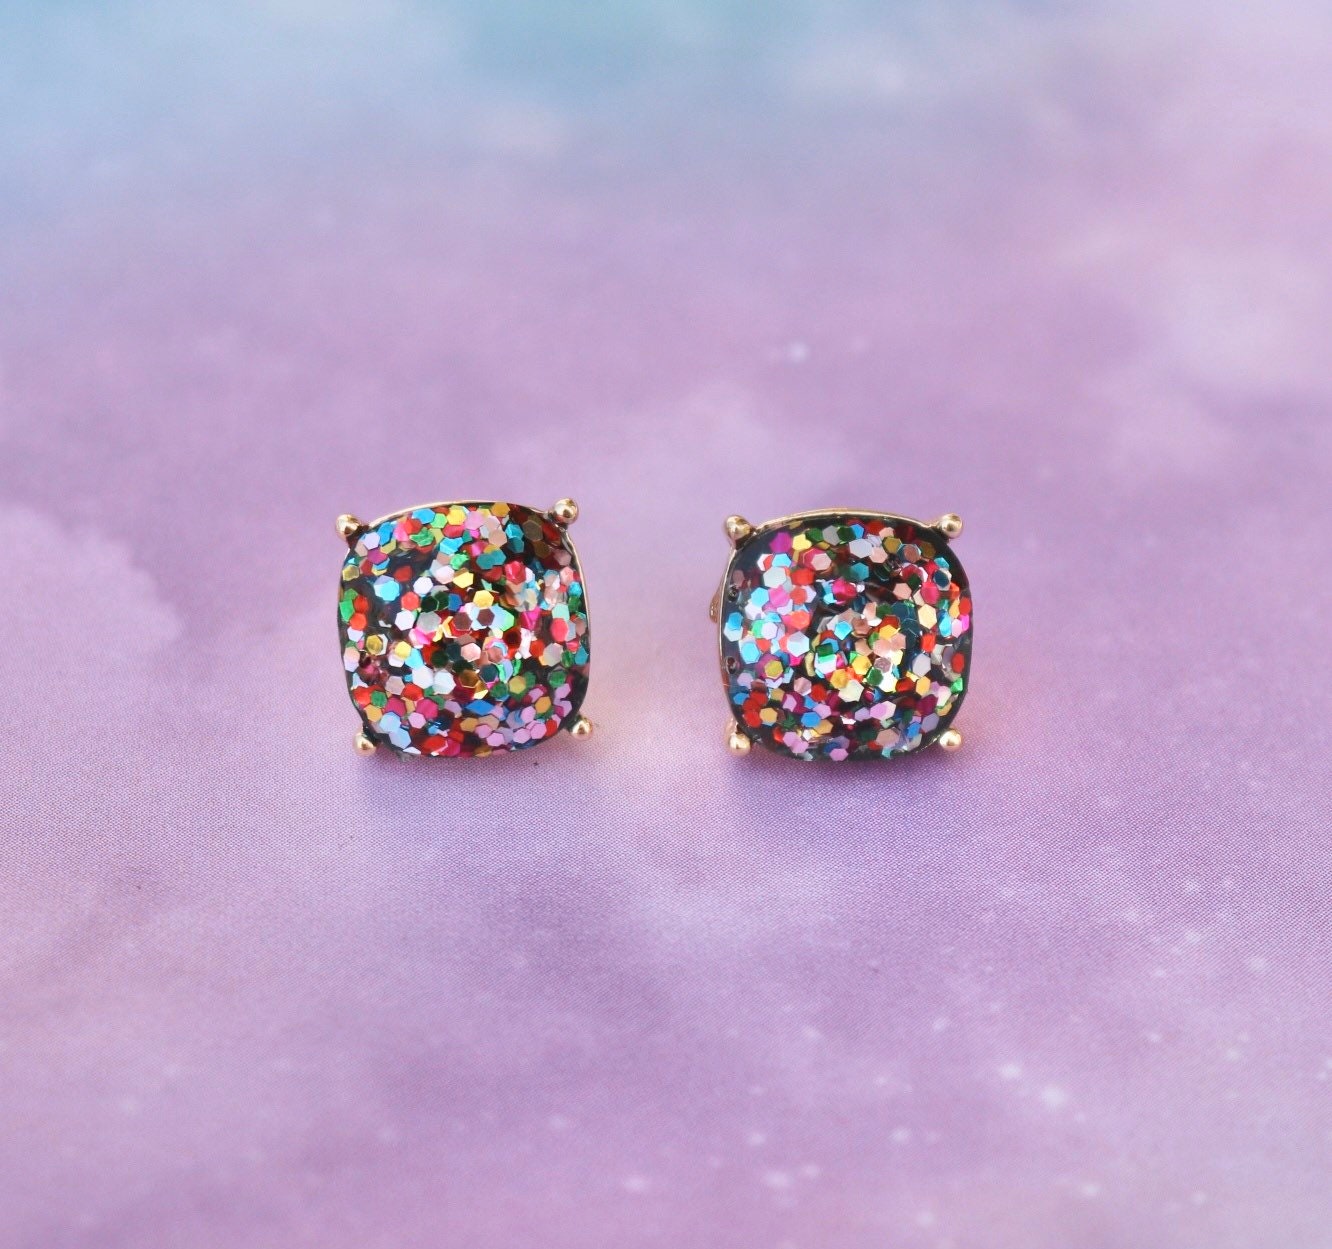 Chunky Glitter Studs / Square Round / Statement Earrings / - Etsy